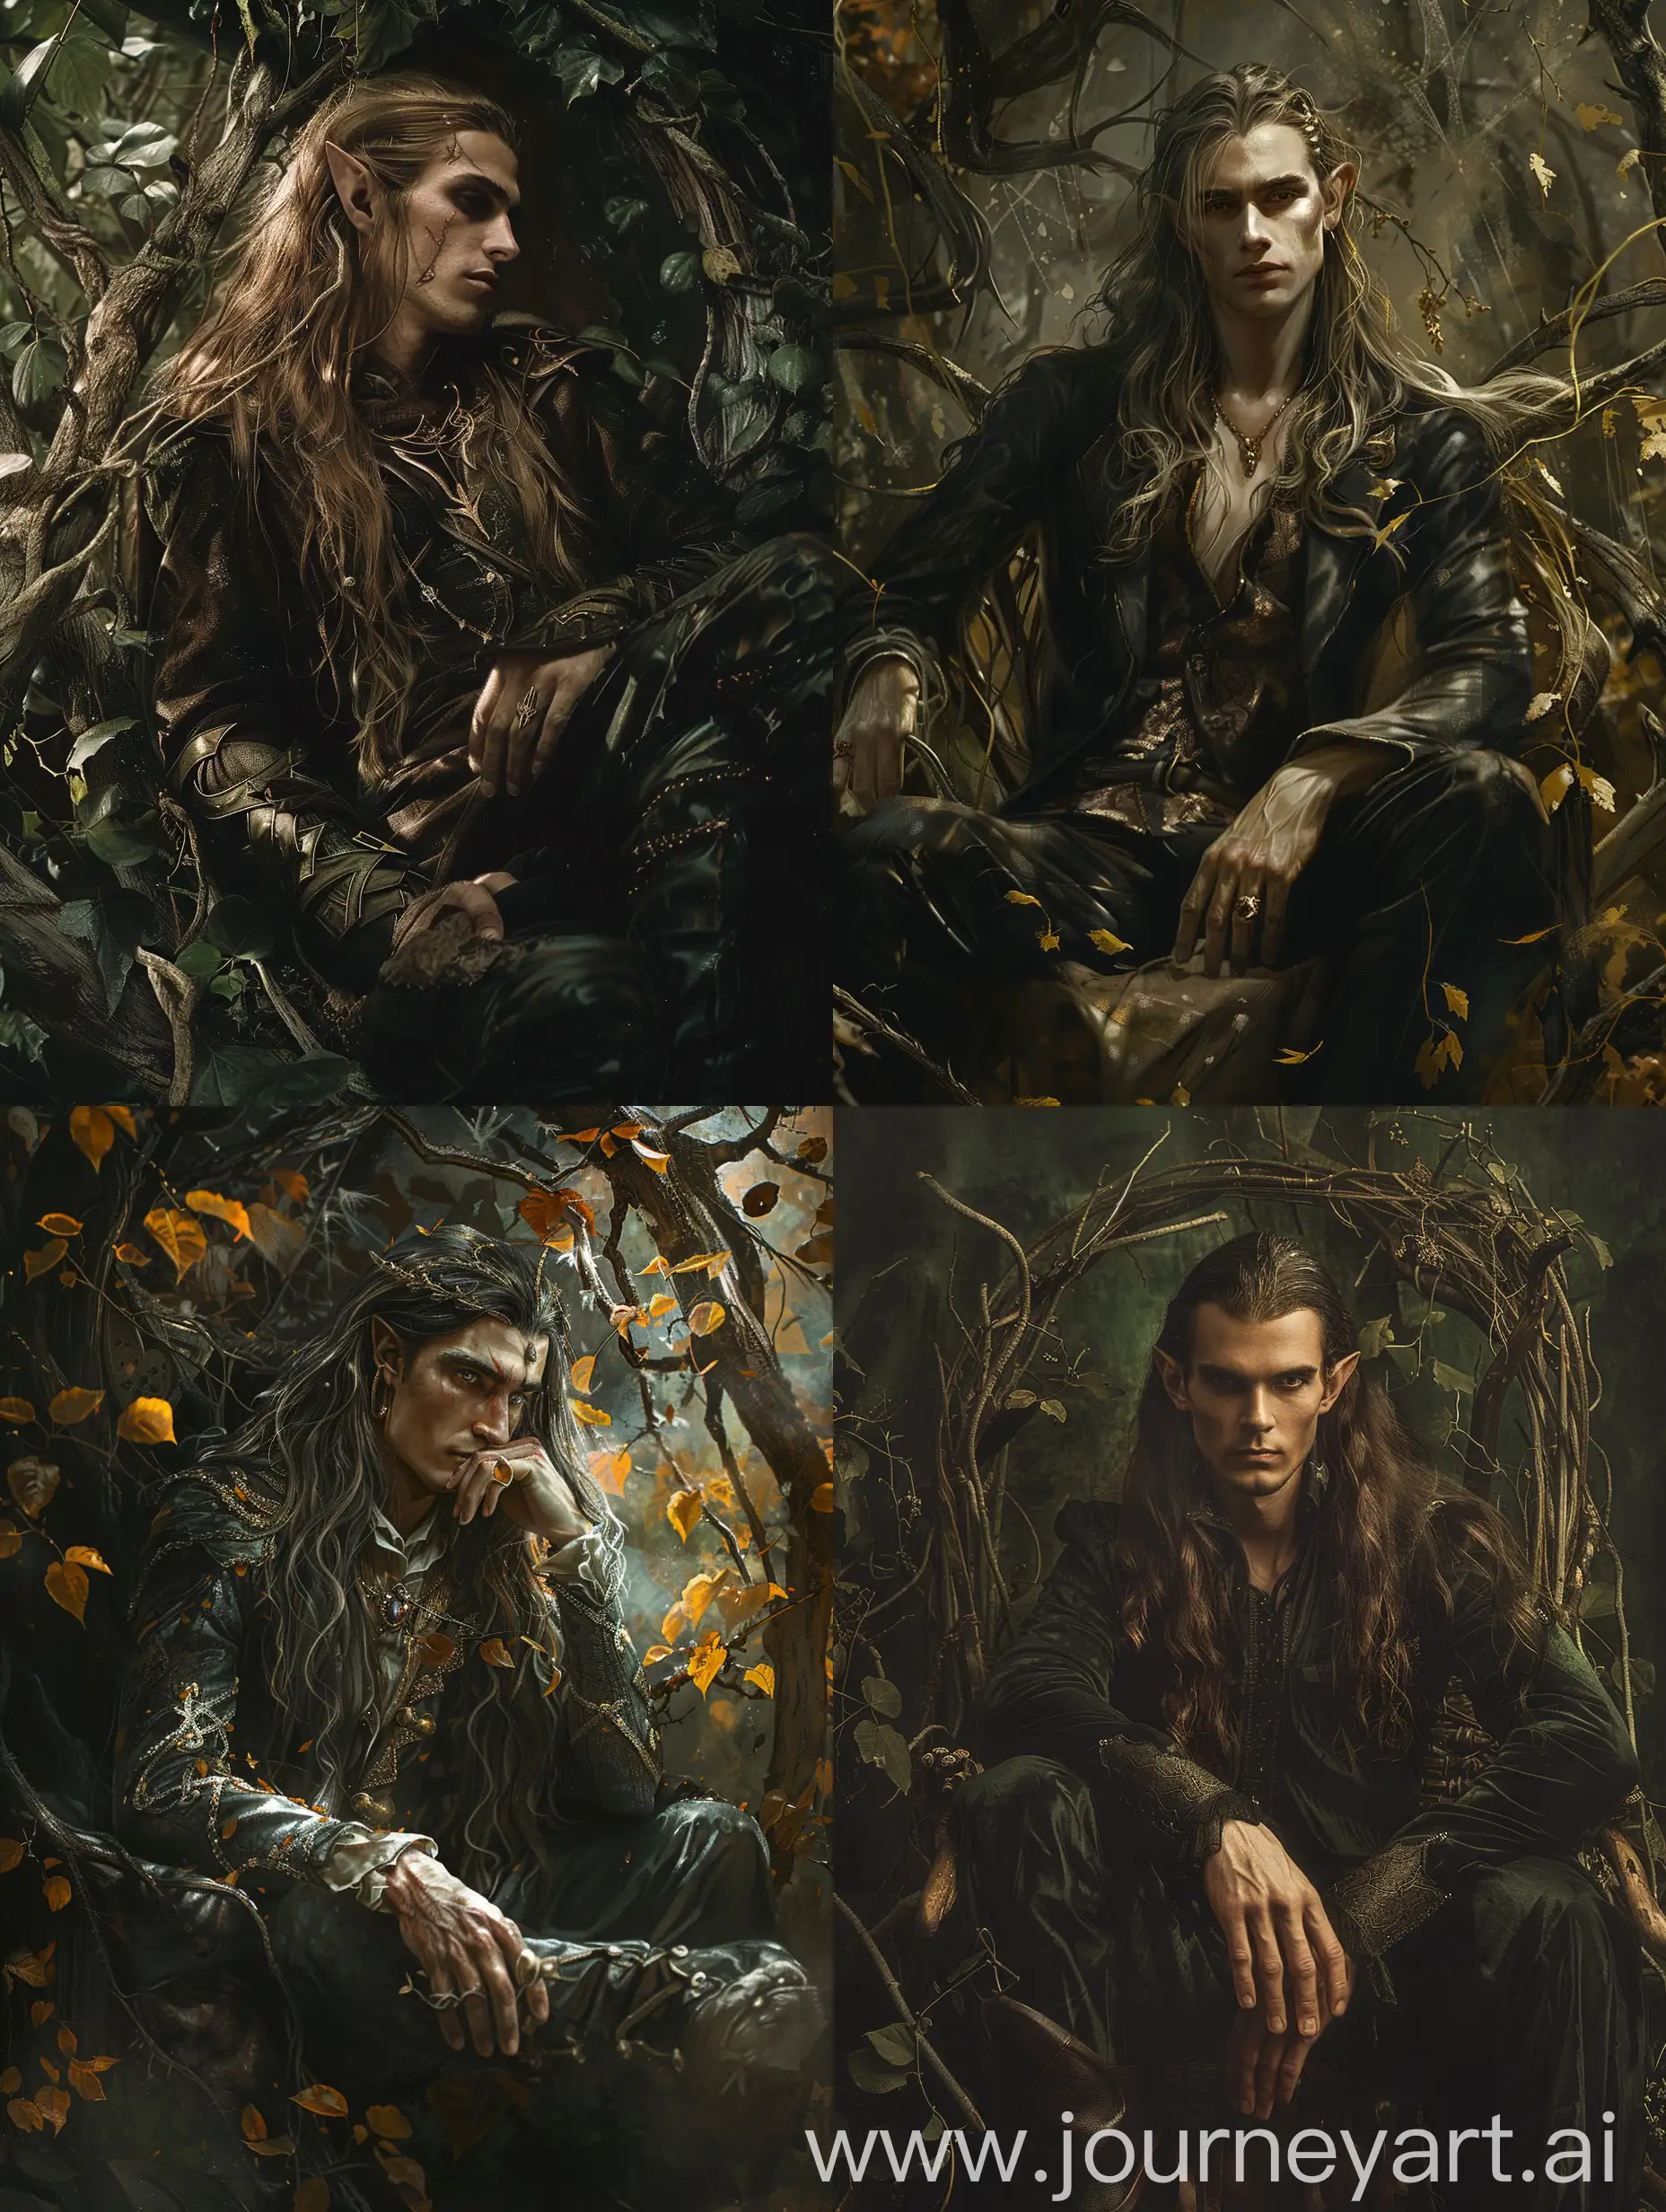 Male-Elf-Prince-Sitting-on-Throne-of-Branches-and-Leaves